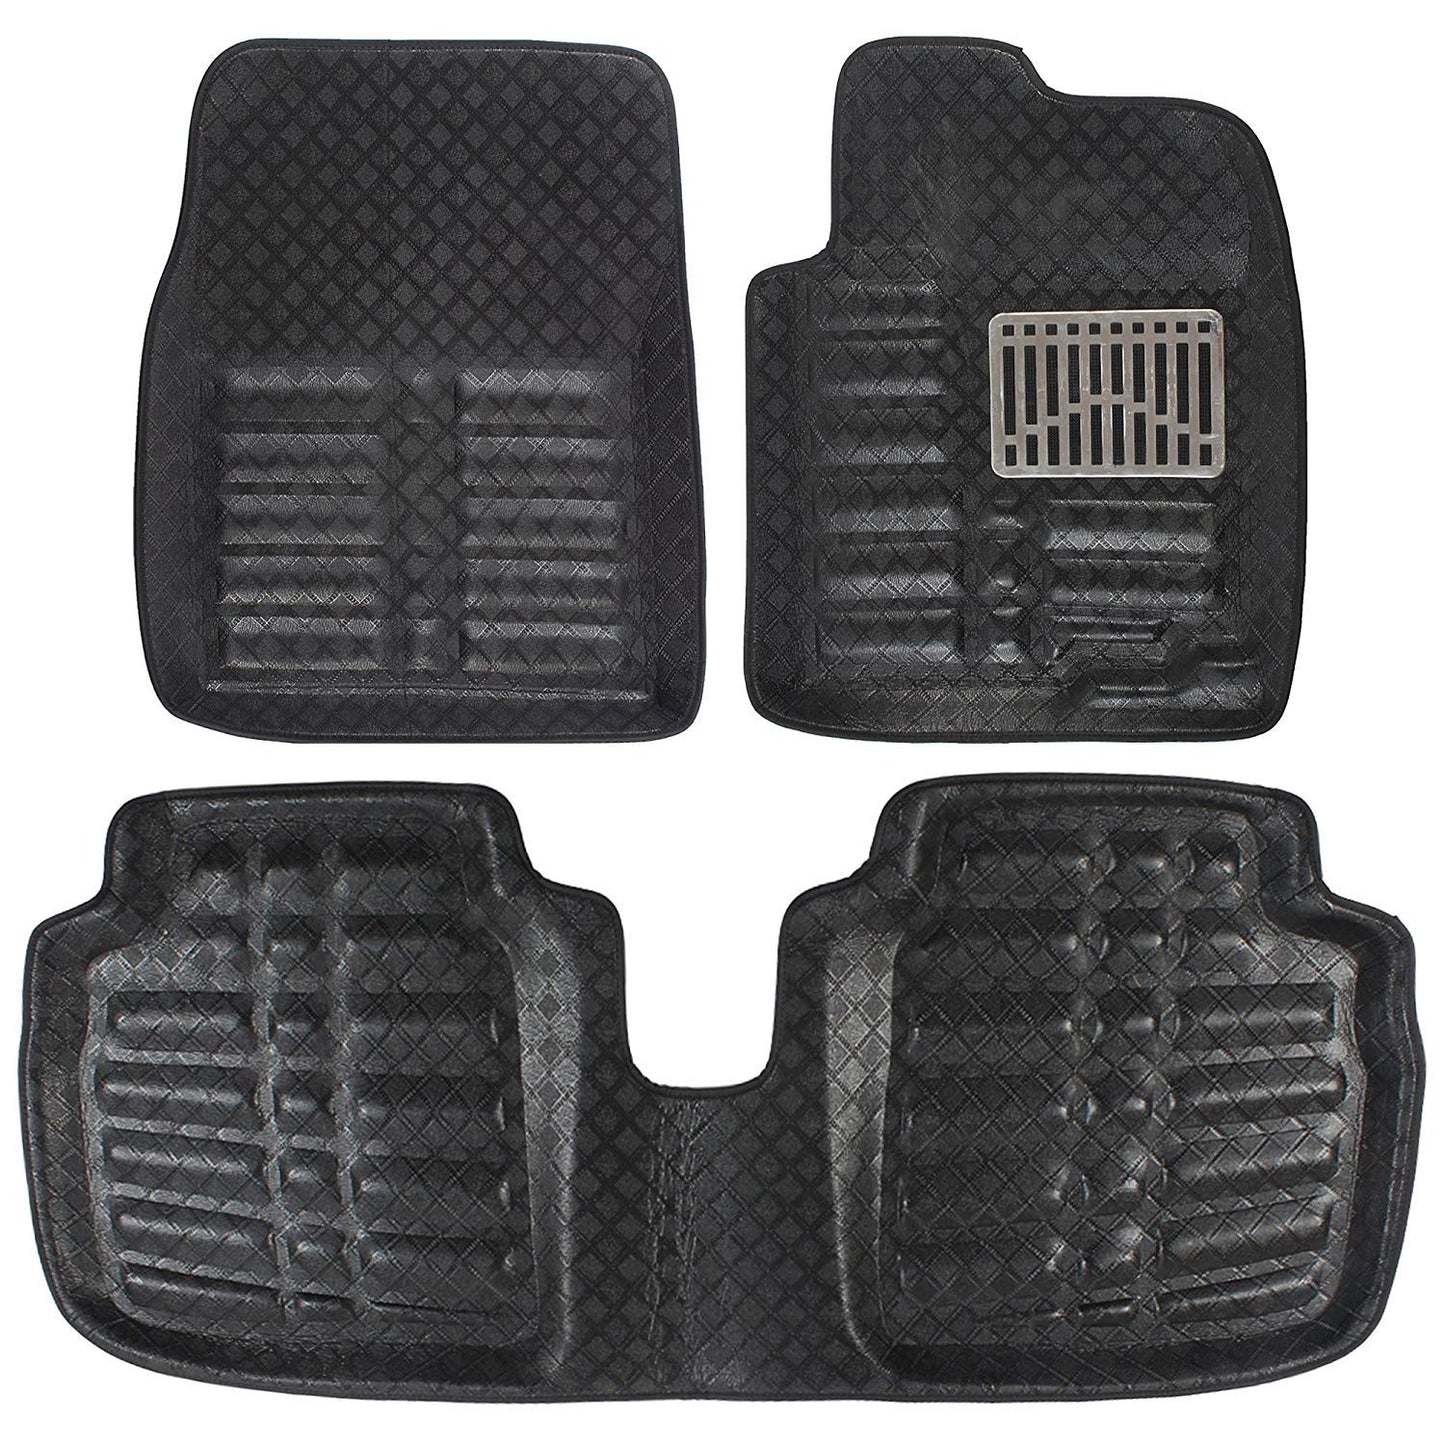 Oshotto 4D Artificial Leather Car Floor Mats For Hyundai i20 Elite 2014-2023 - Set of 3 (2 pcs Front & one Long Single Rear pc) - Black